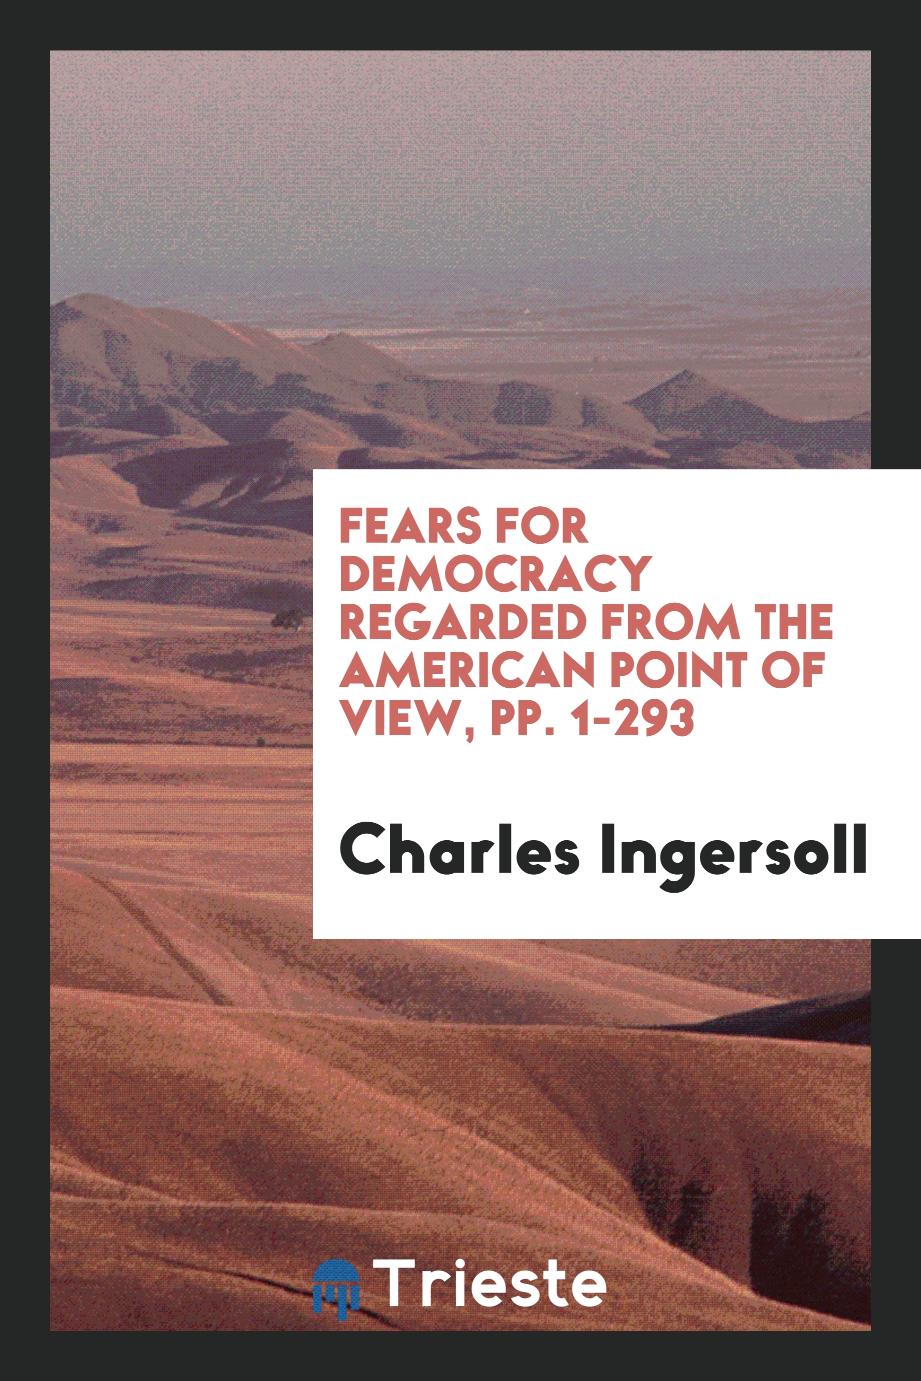 Fears for Democracy Regarded from the American Point of View, pp. 1-293